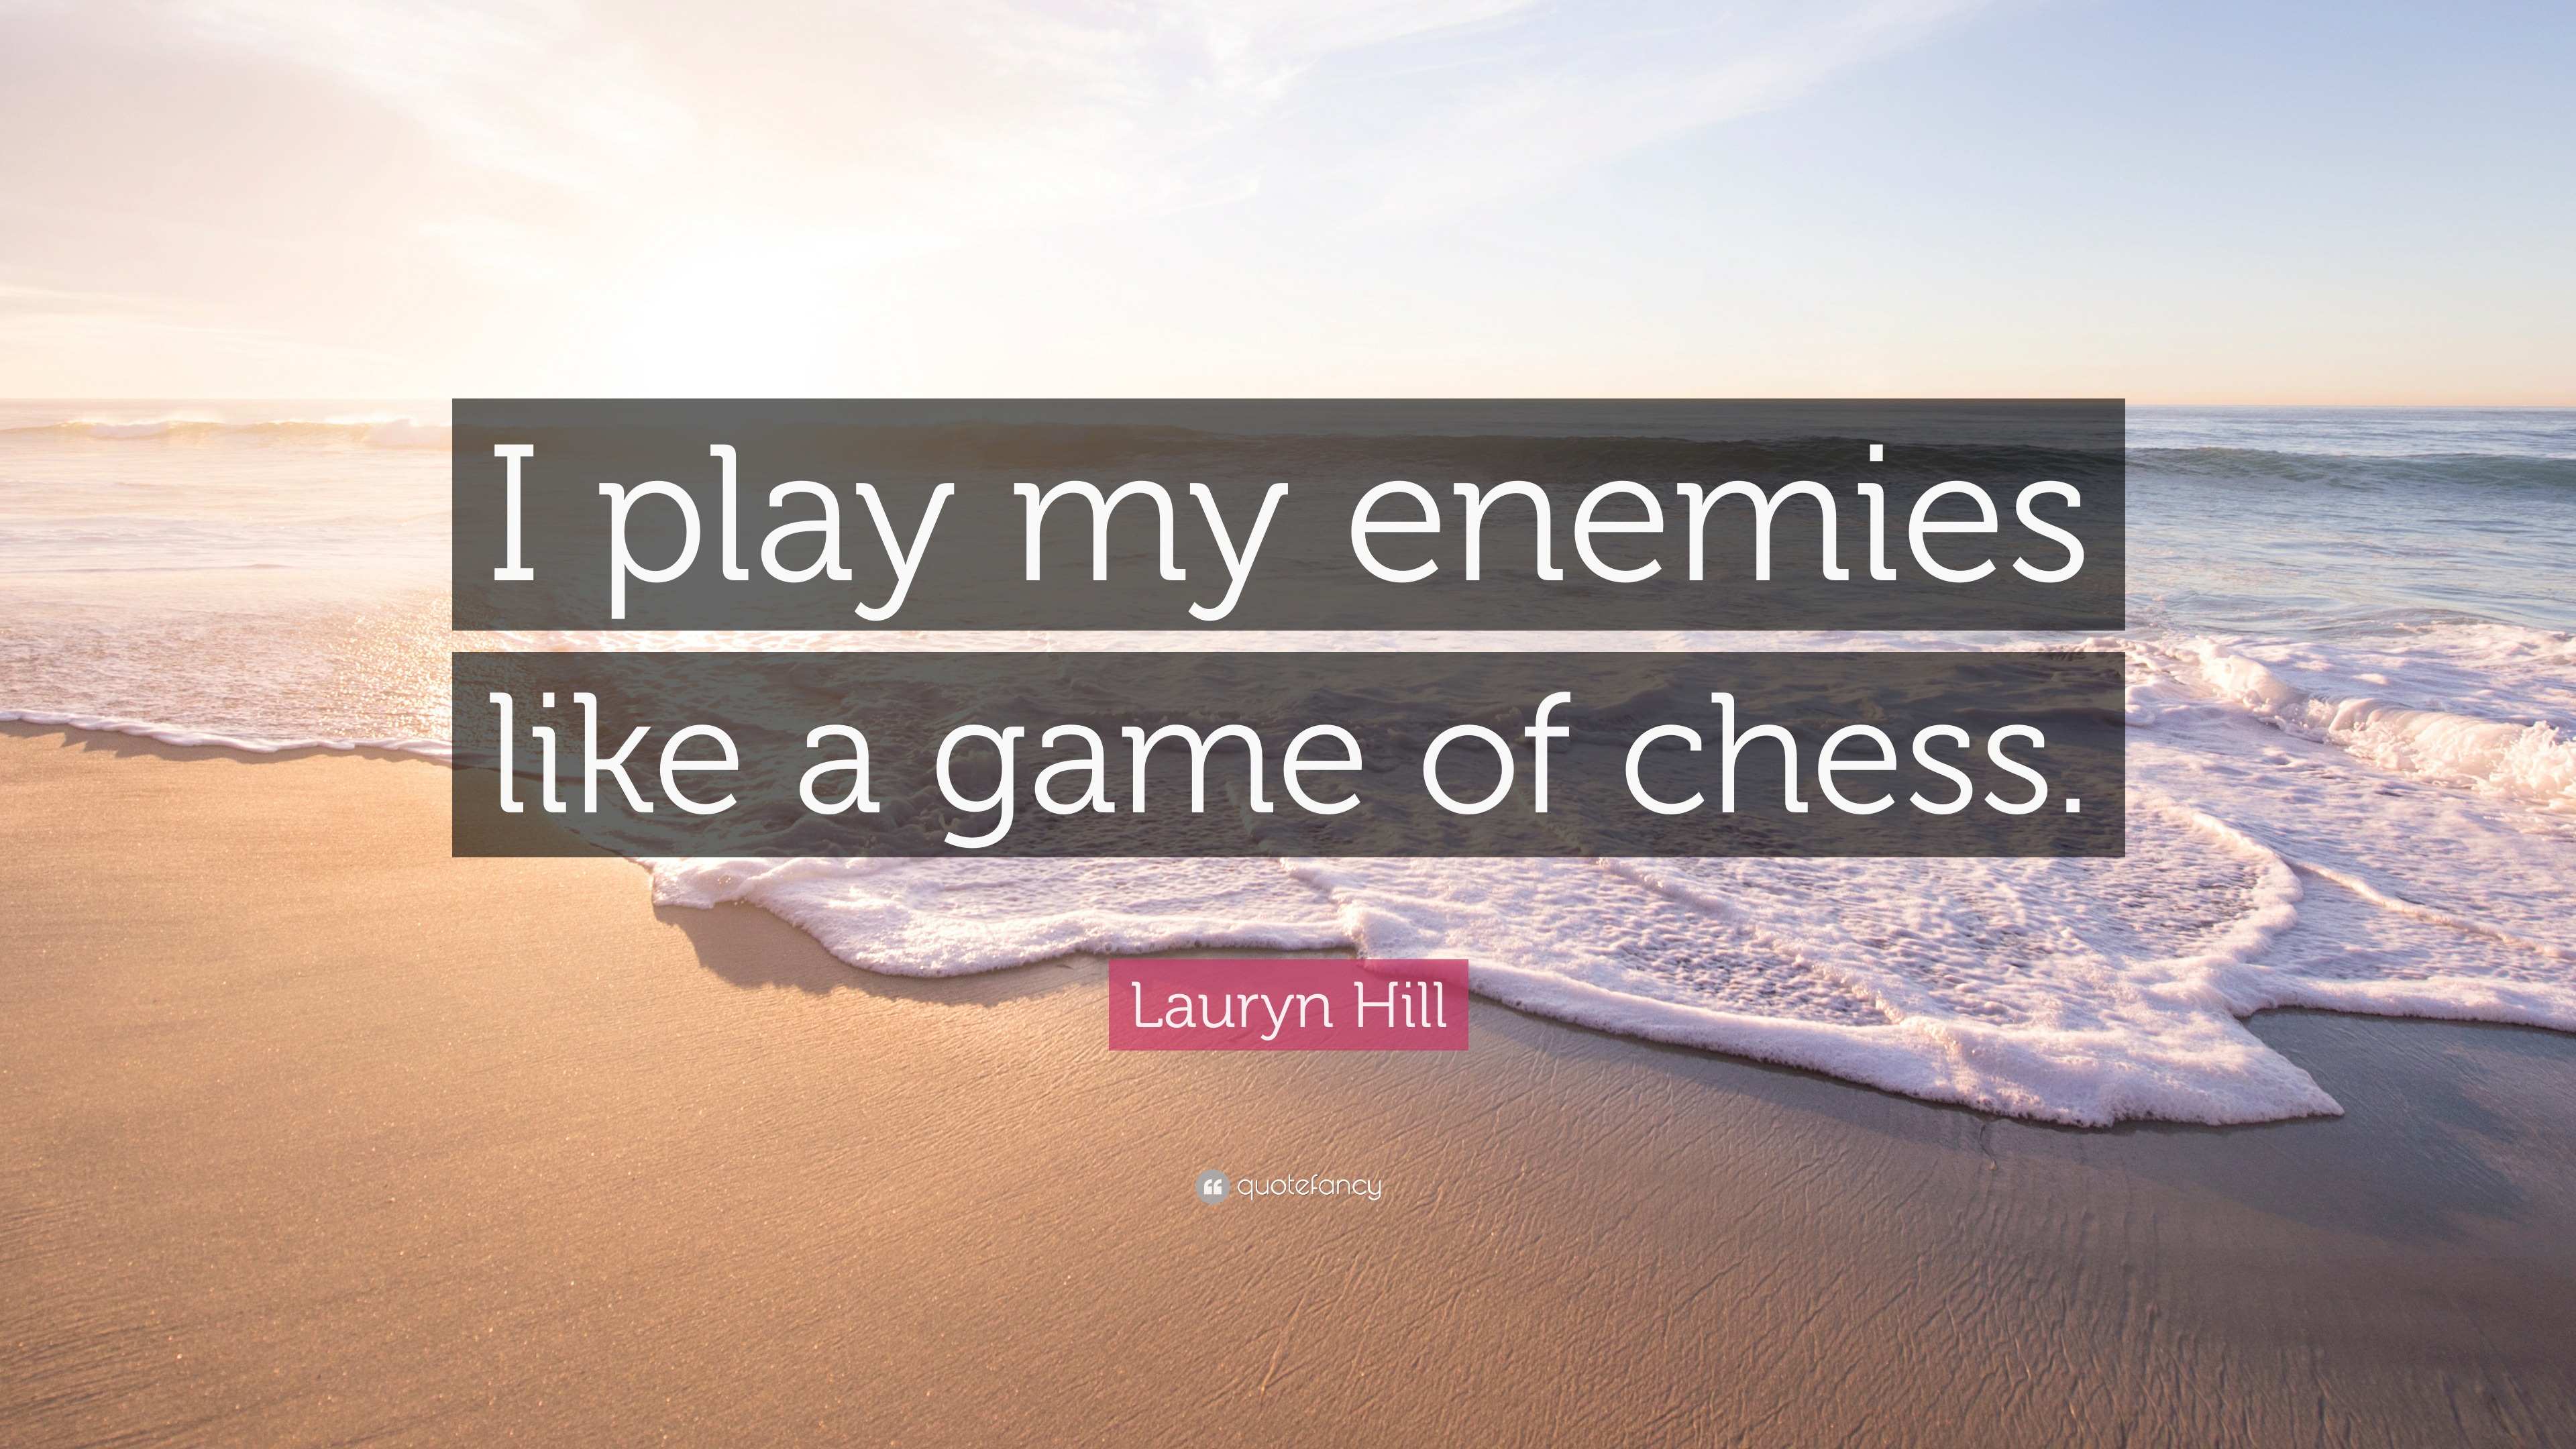 Lauryn Hill Quote: “I play my enemies like a game of chess.”